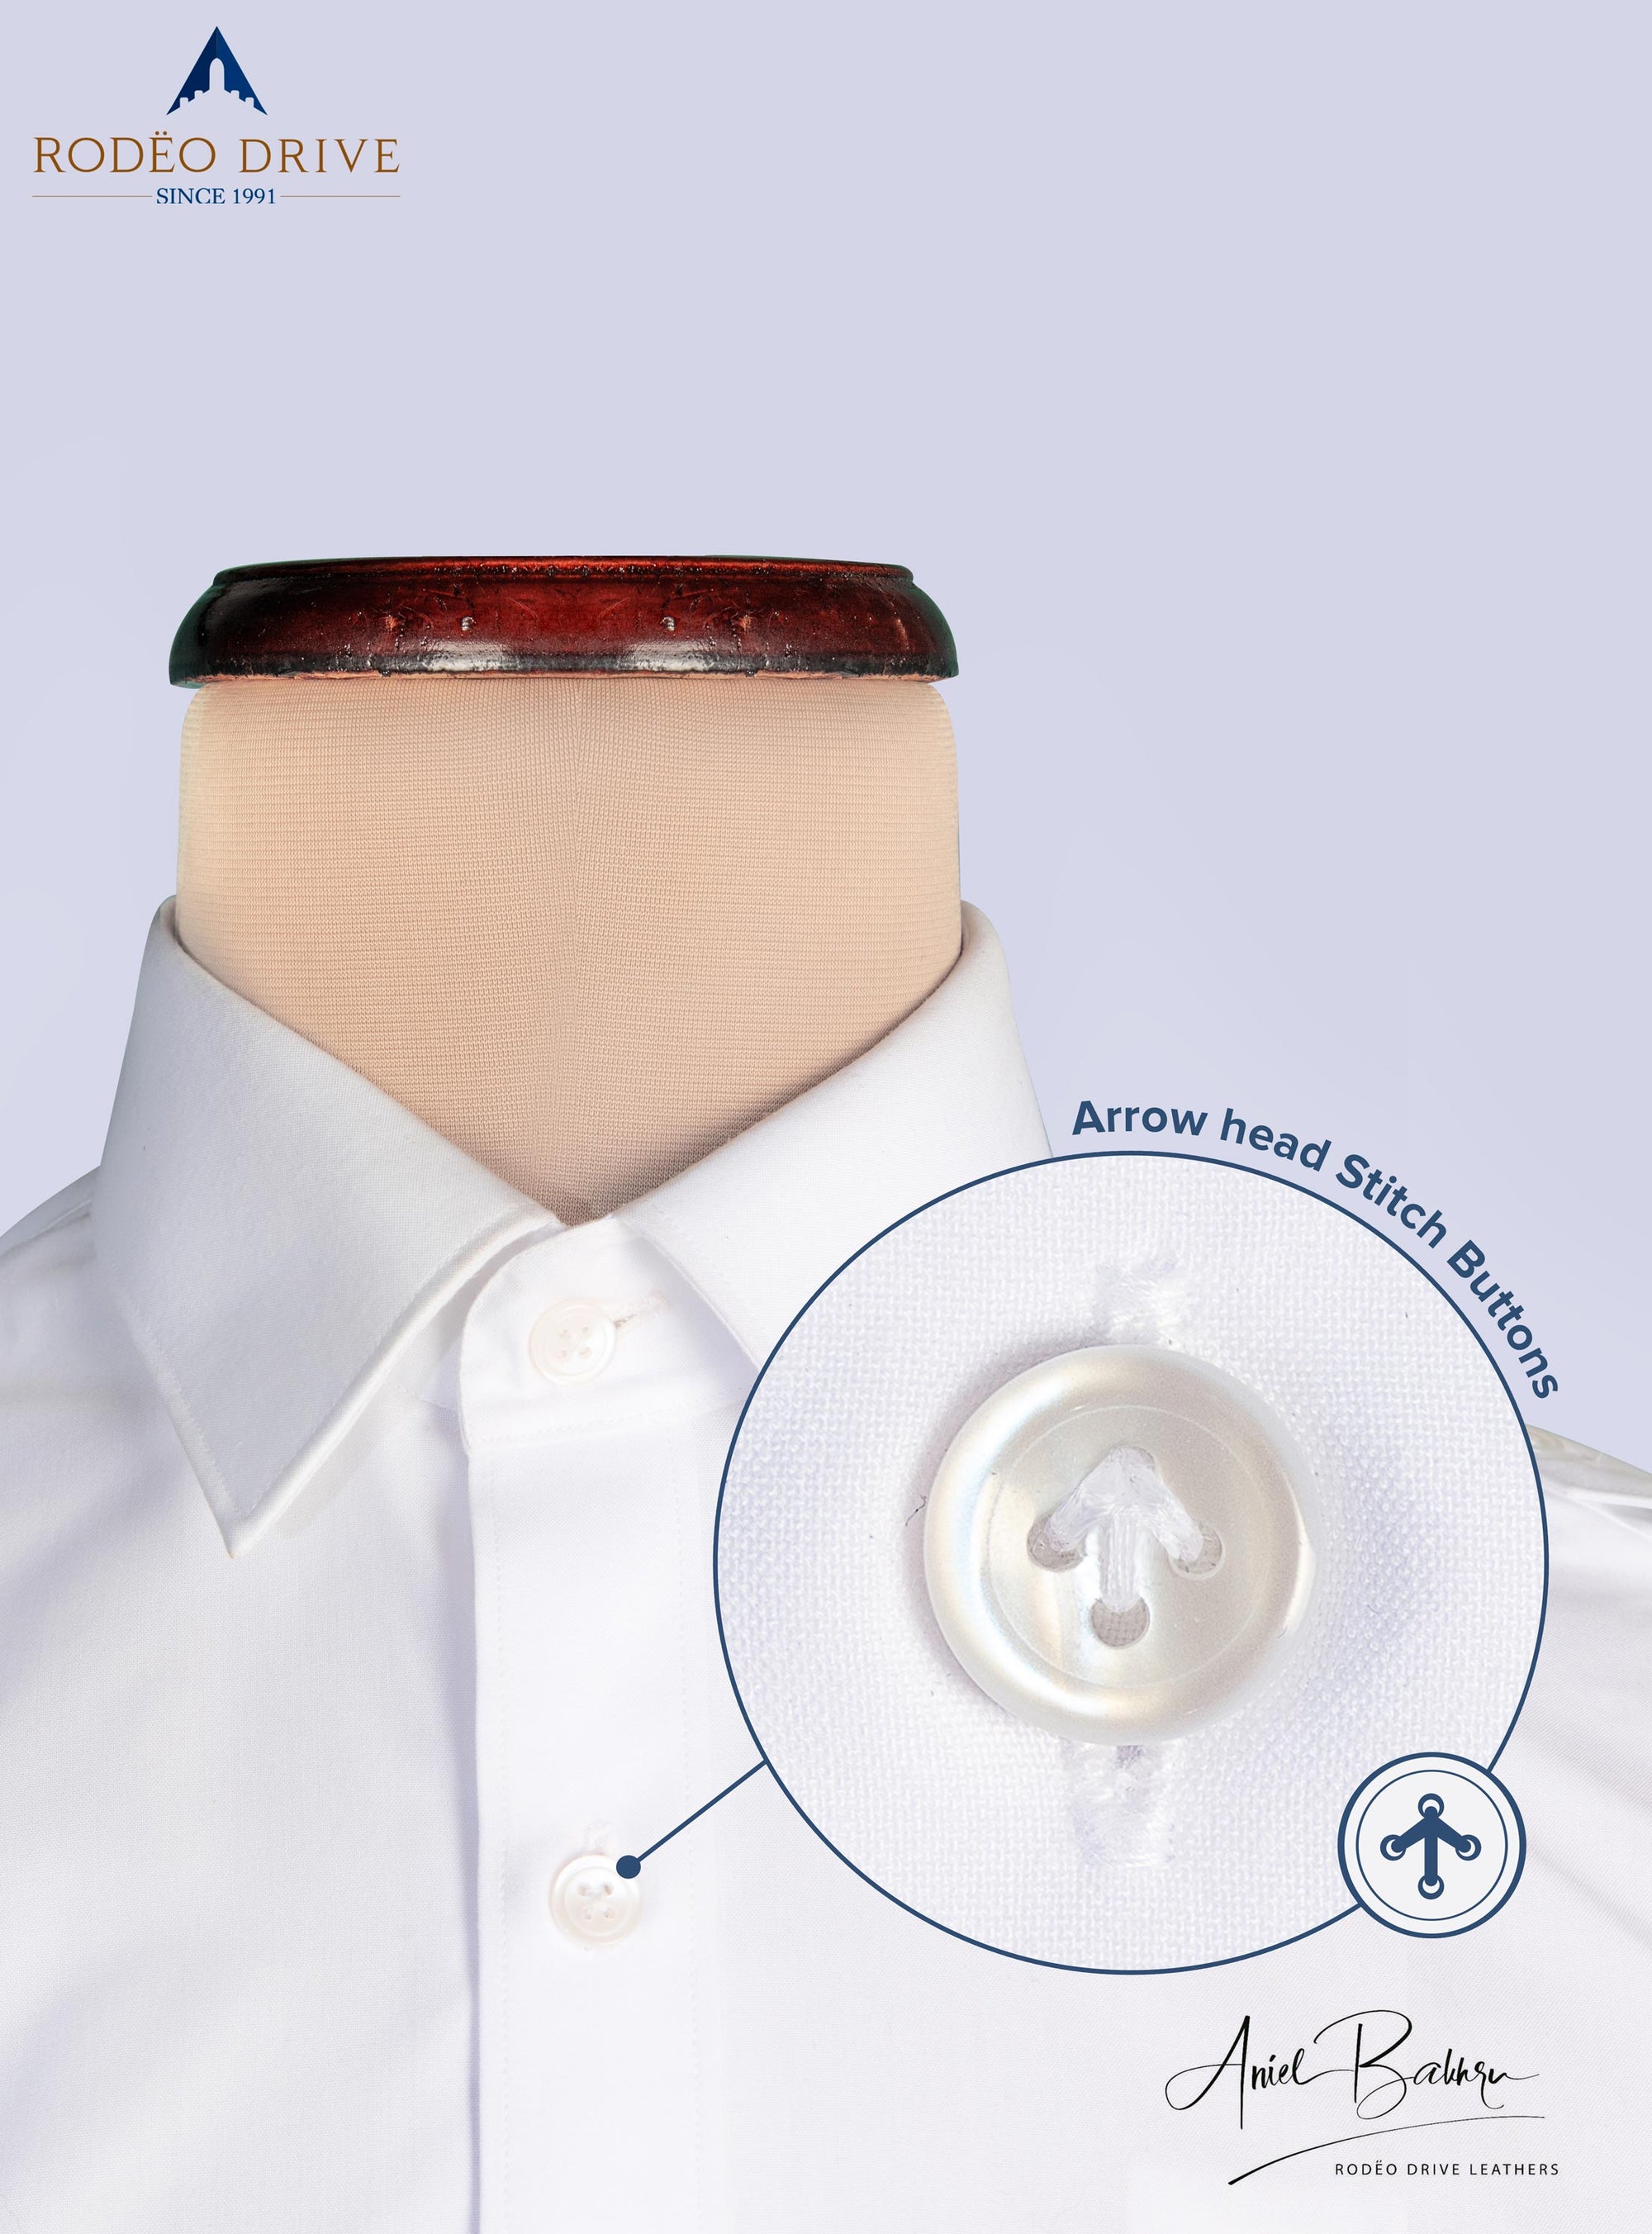 Image depicting Arrow head stitched buttons on white Women's Pilot shirt